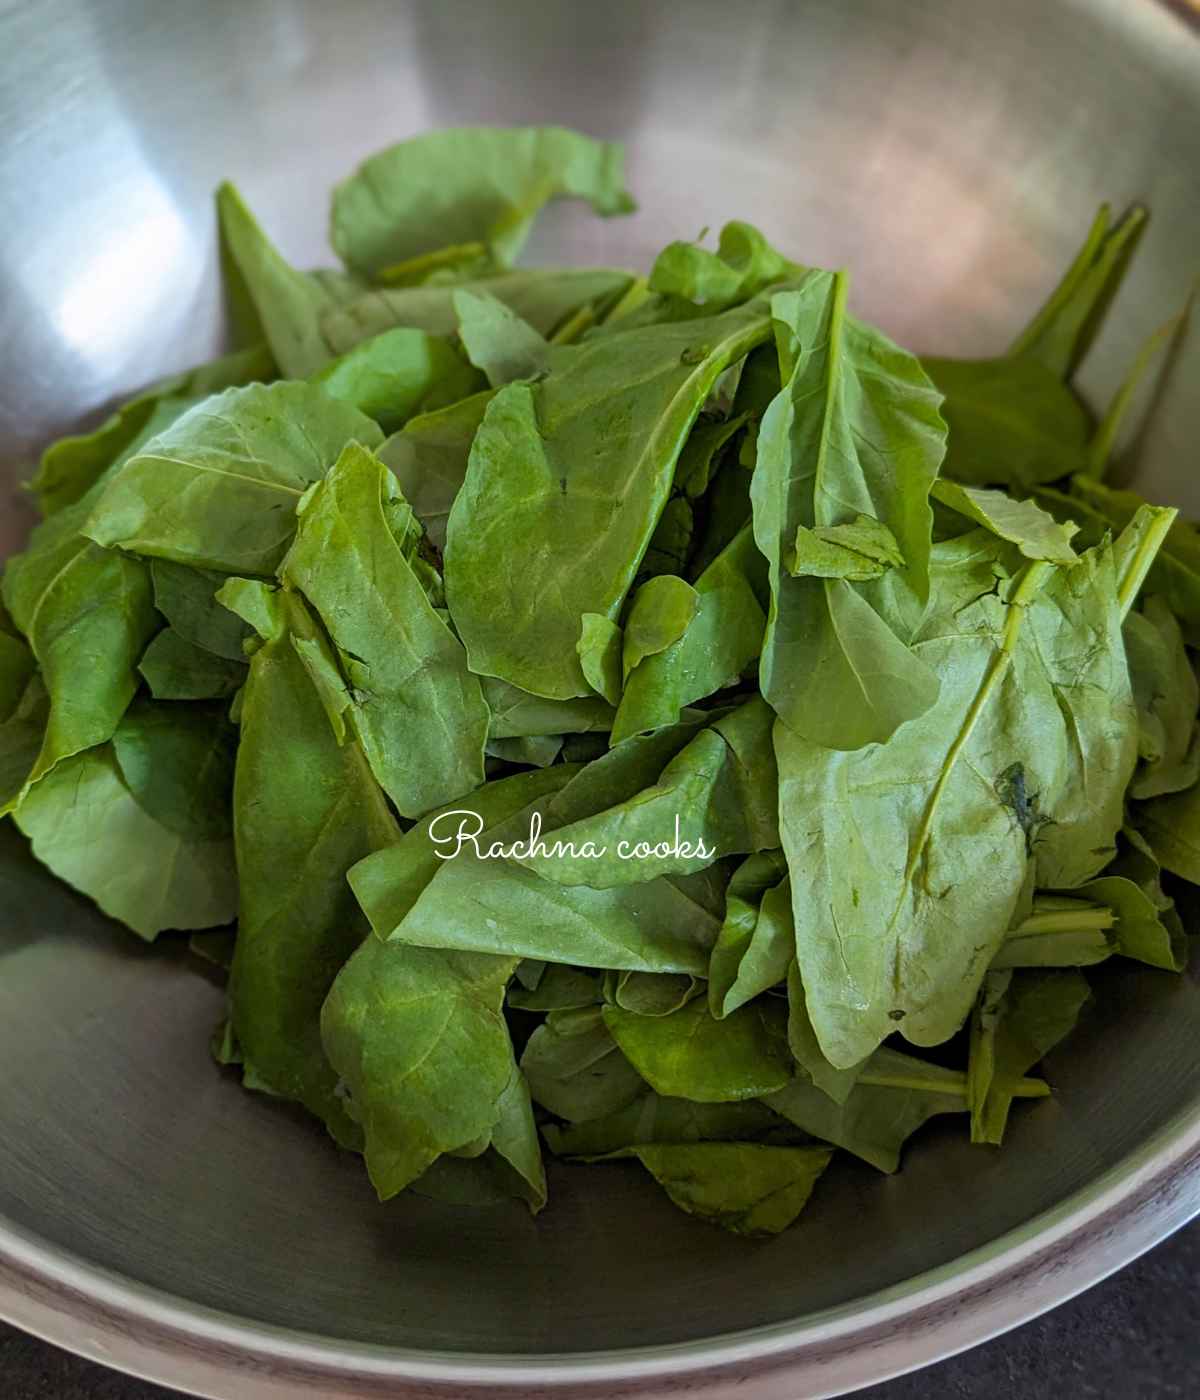 Washed and dried spinach